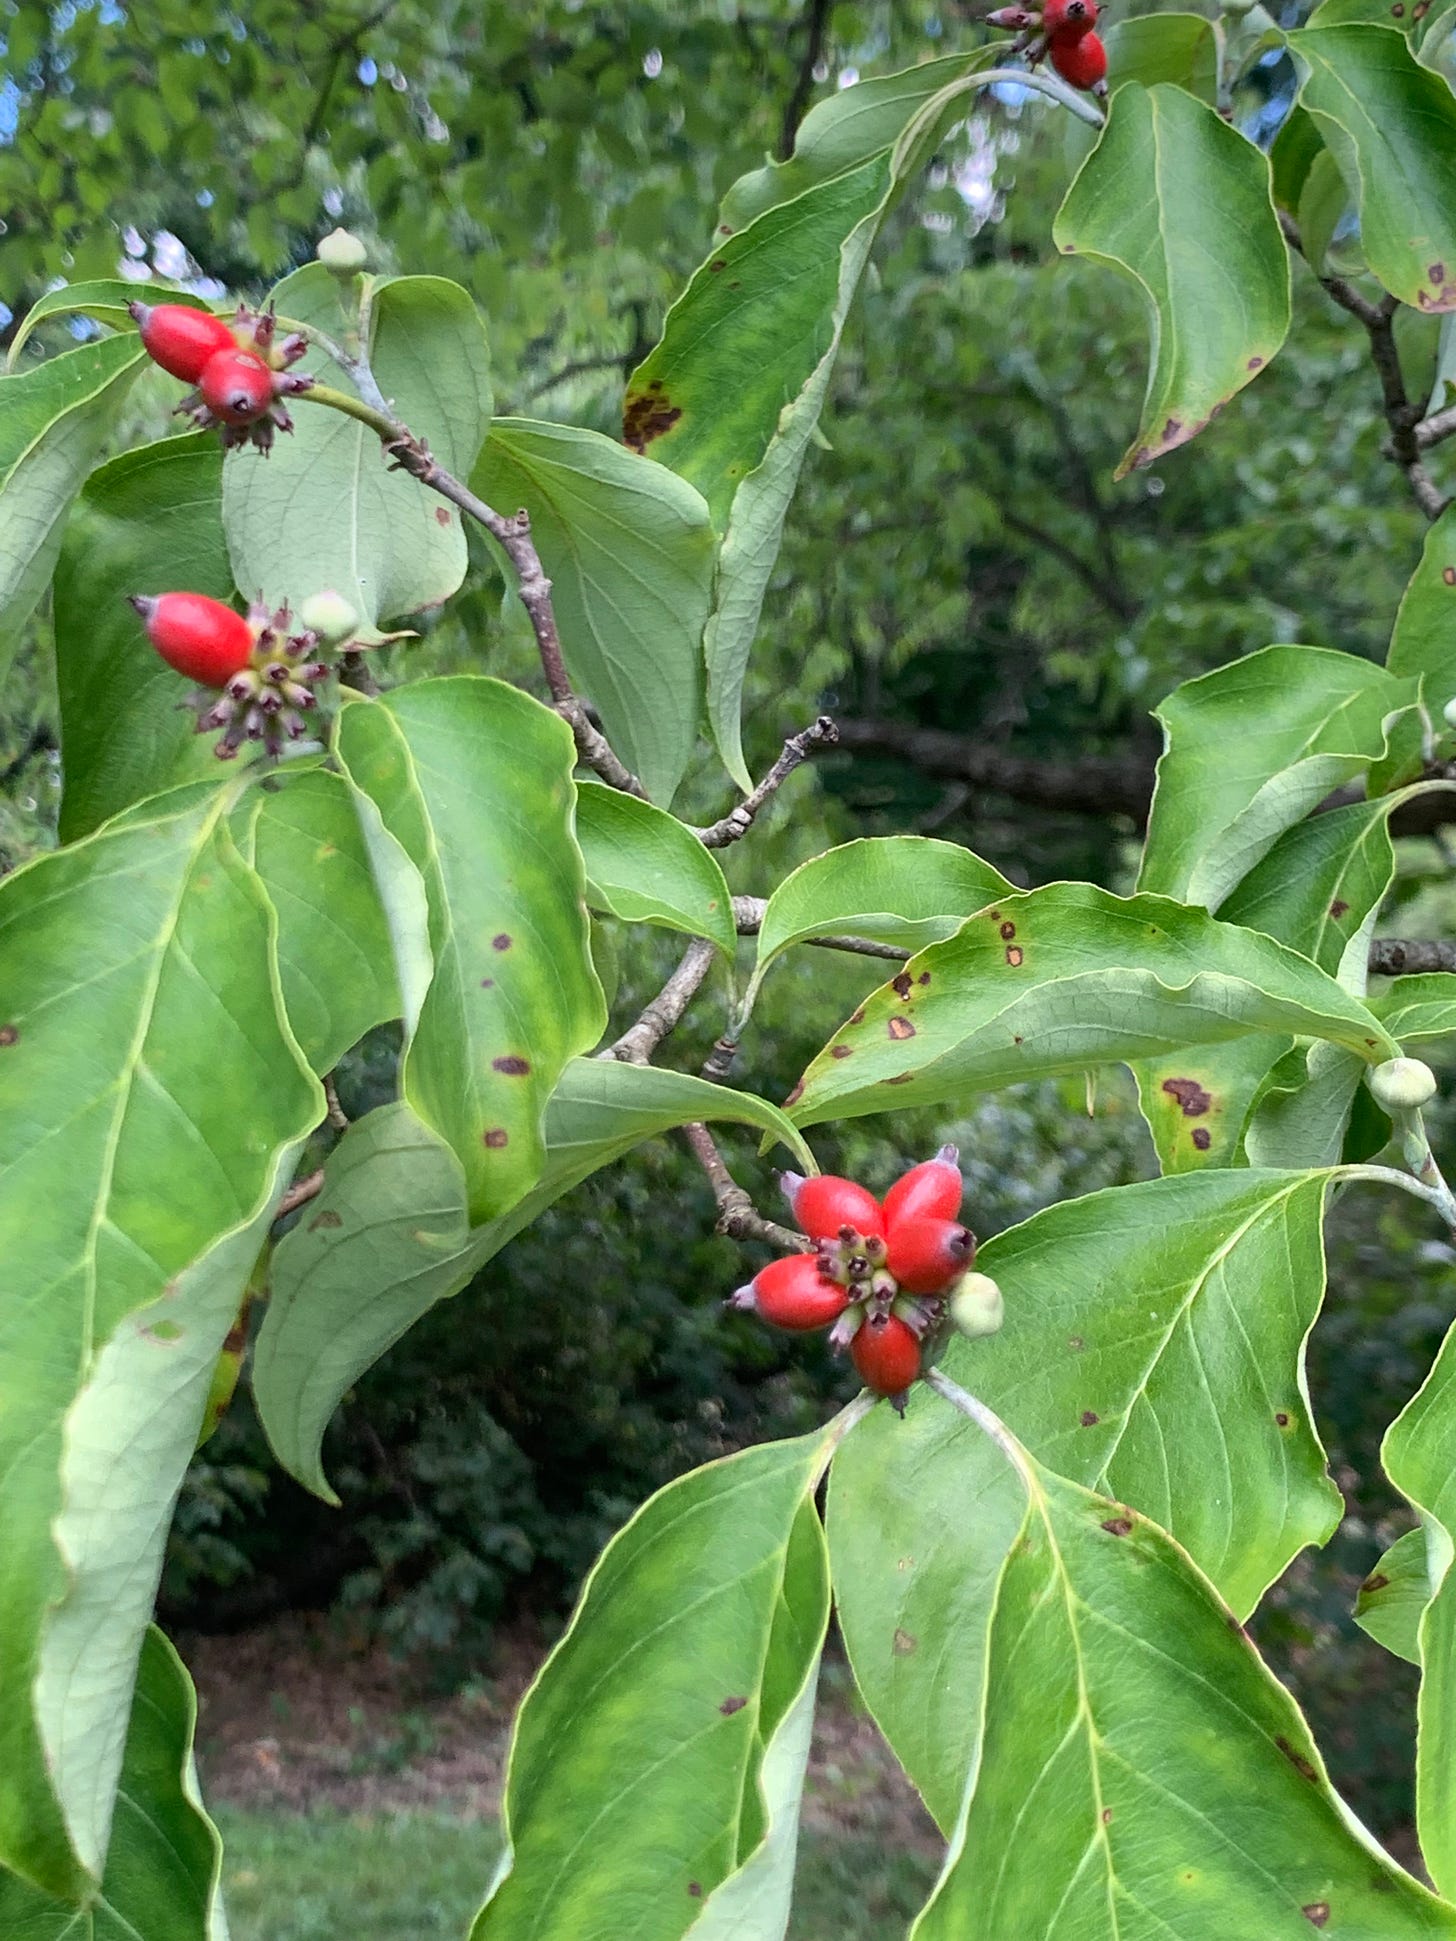 Bright green leaves with scattered bunches on oblong, bright red berries.